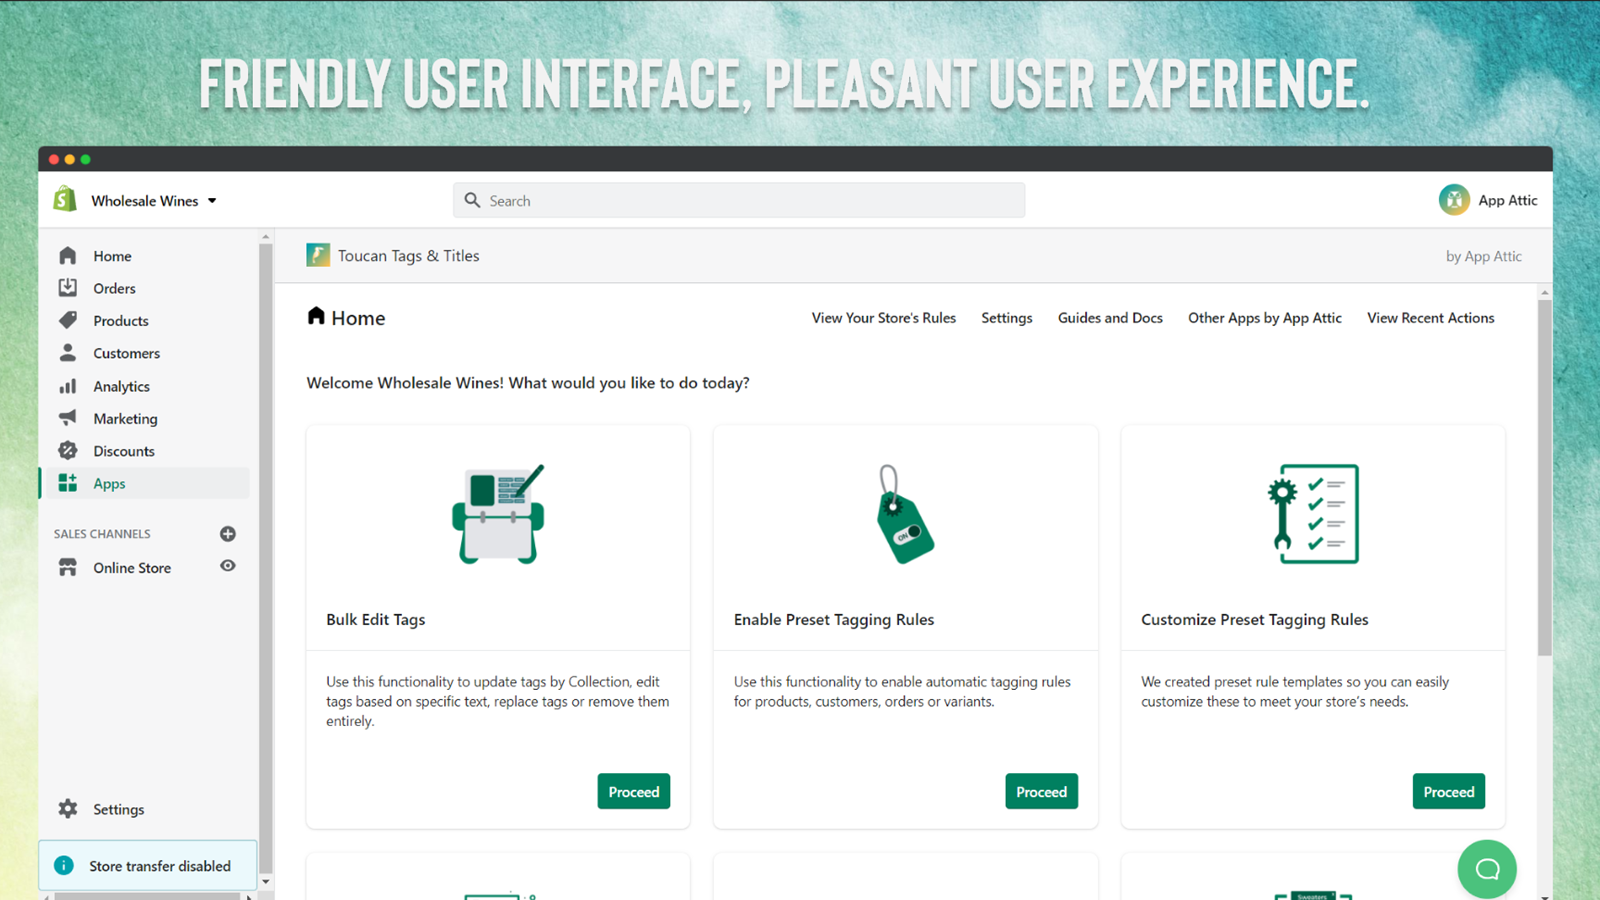 Friendly user interface, pleasant user experience